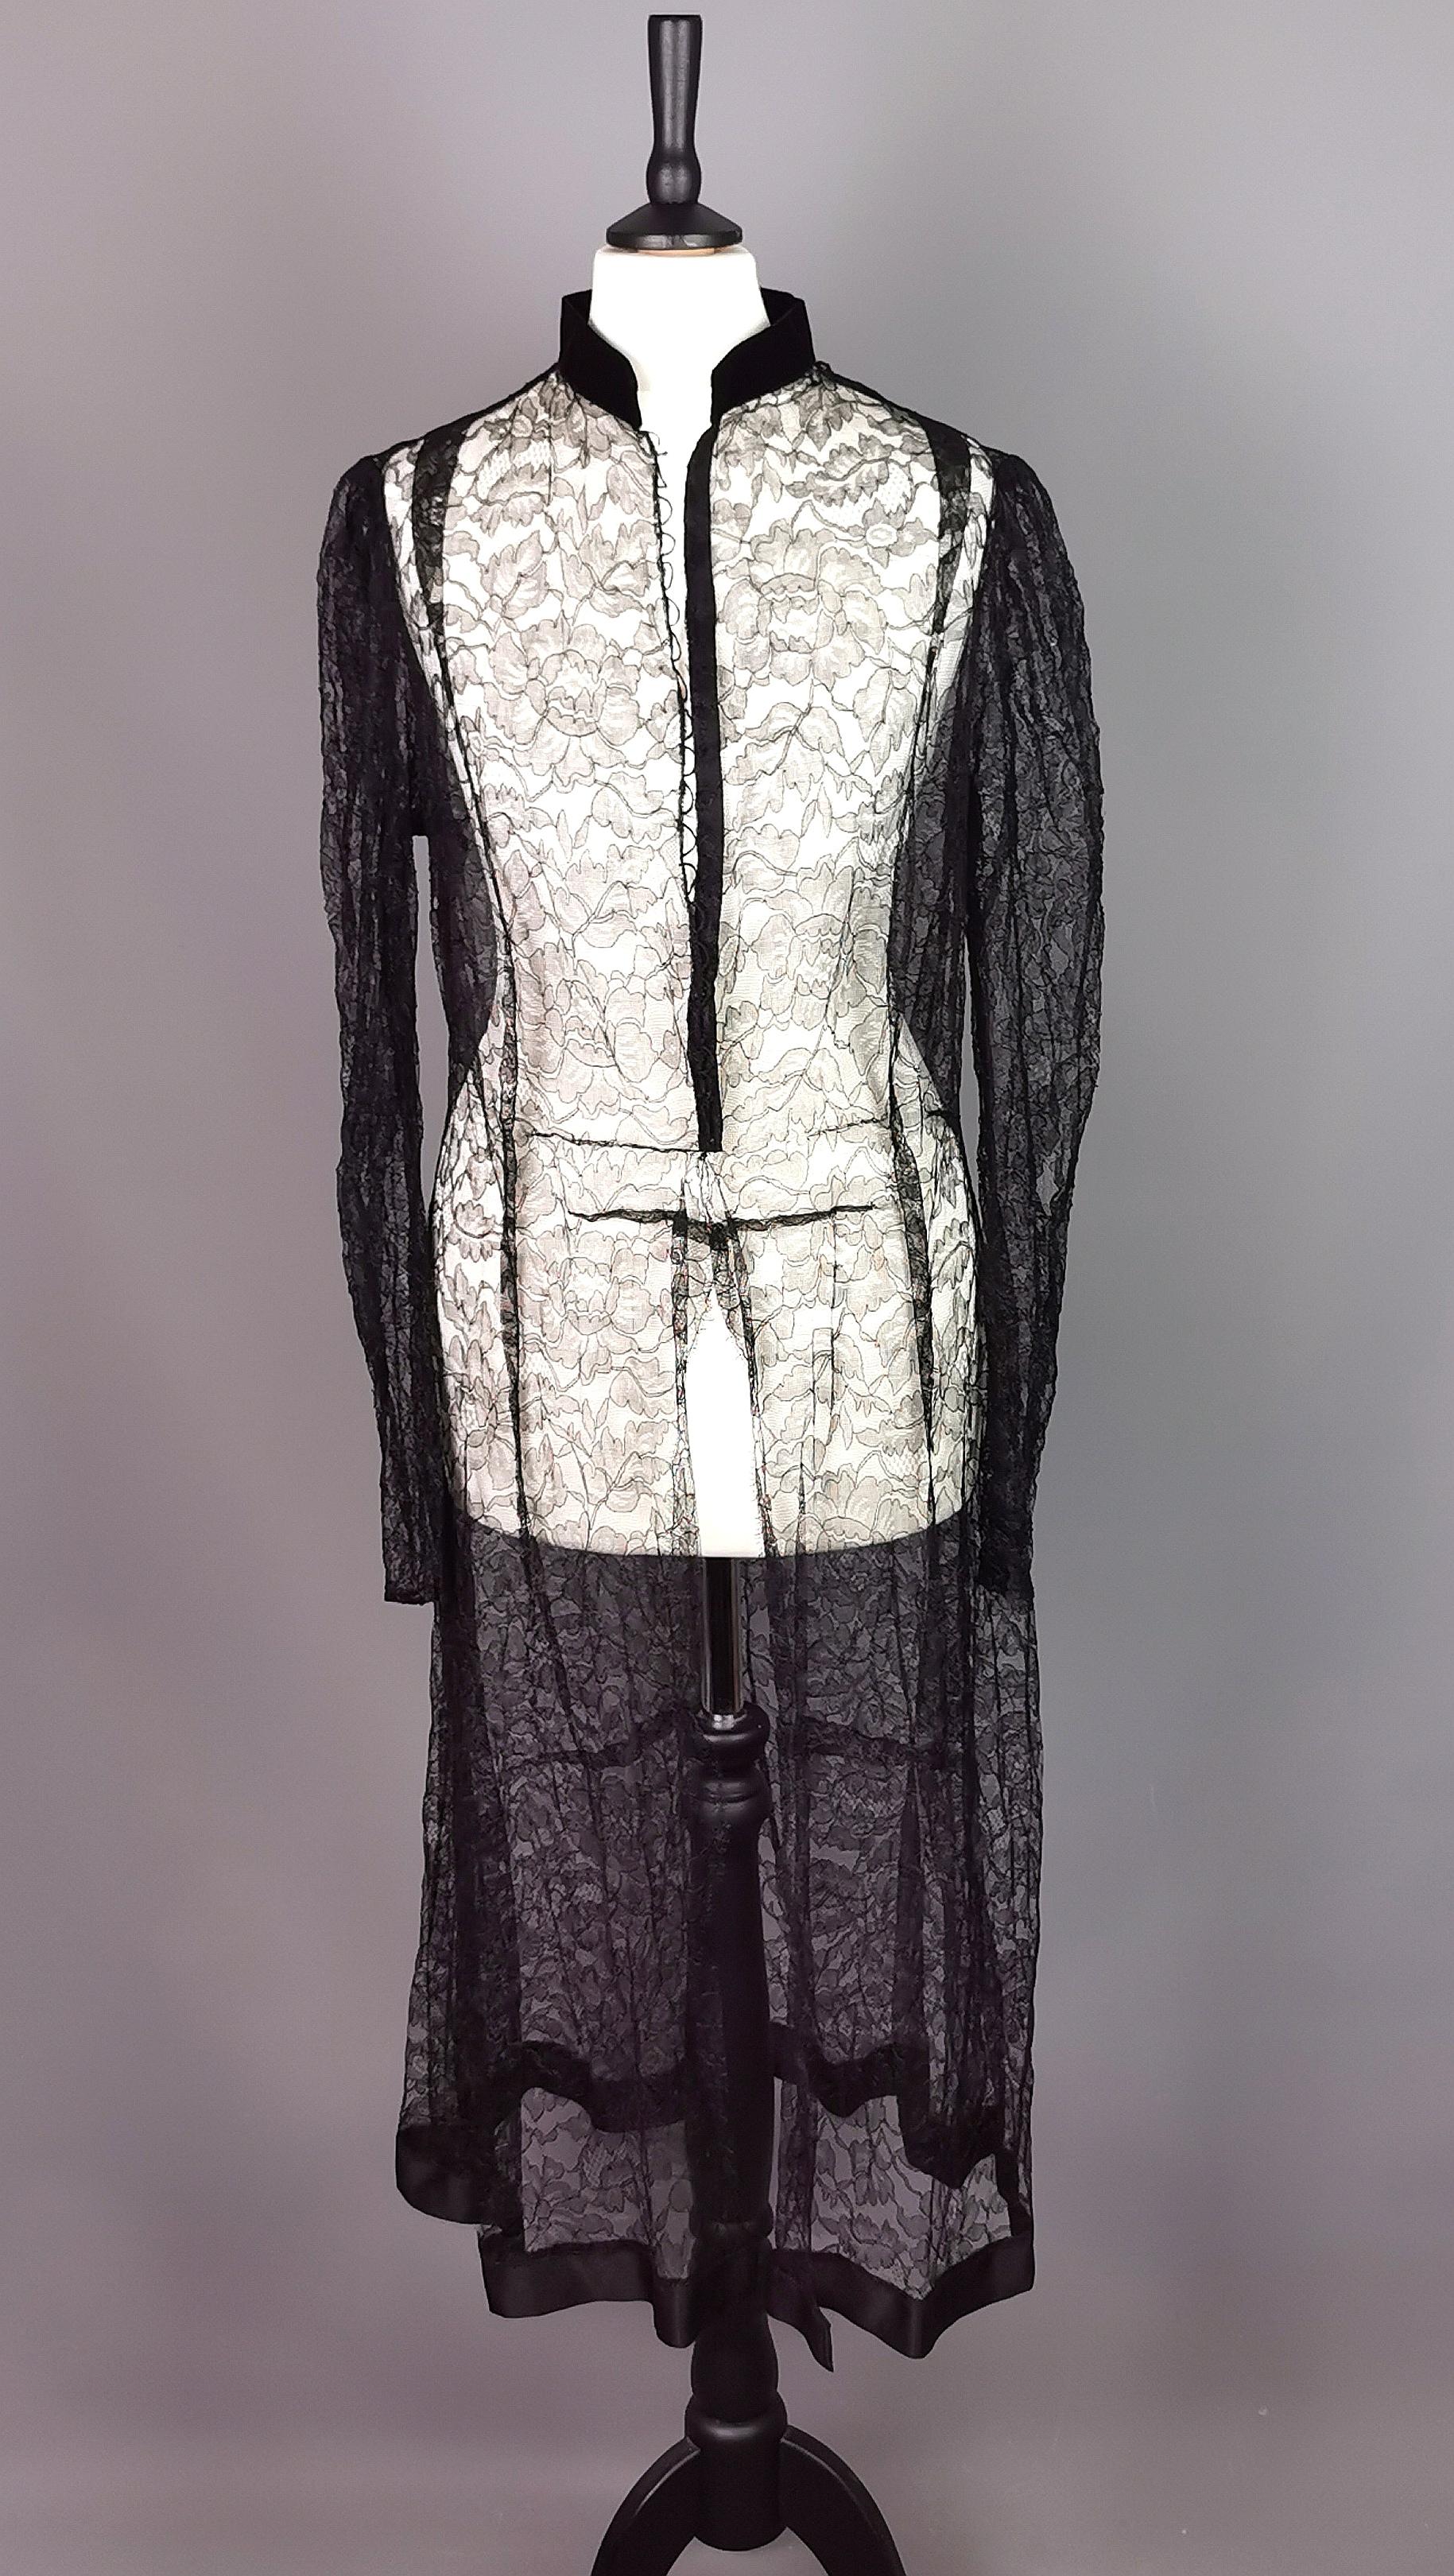 A gorgeous and unusual vintage 1930's Black lace jacket.

A long sleeved jacket made from delicate black Chantilly lace with a velvet lined mandarin style collar and a satin trimmed hem.

It has a slightly wavy hemming up the front and fastens at